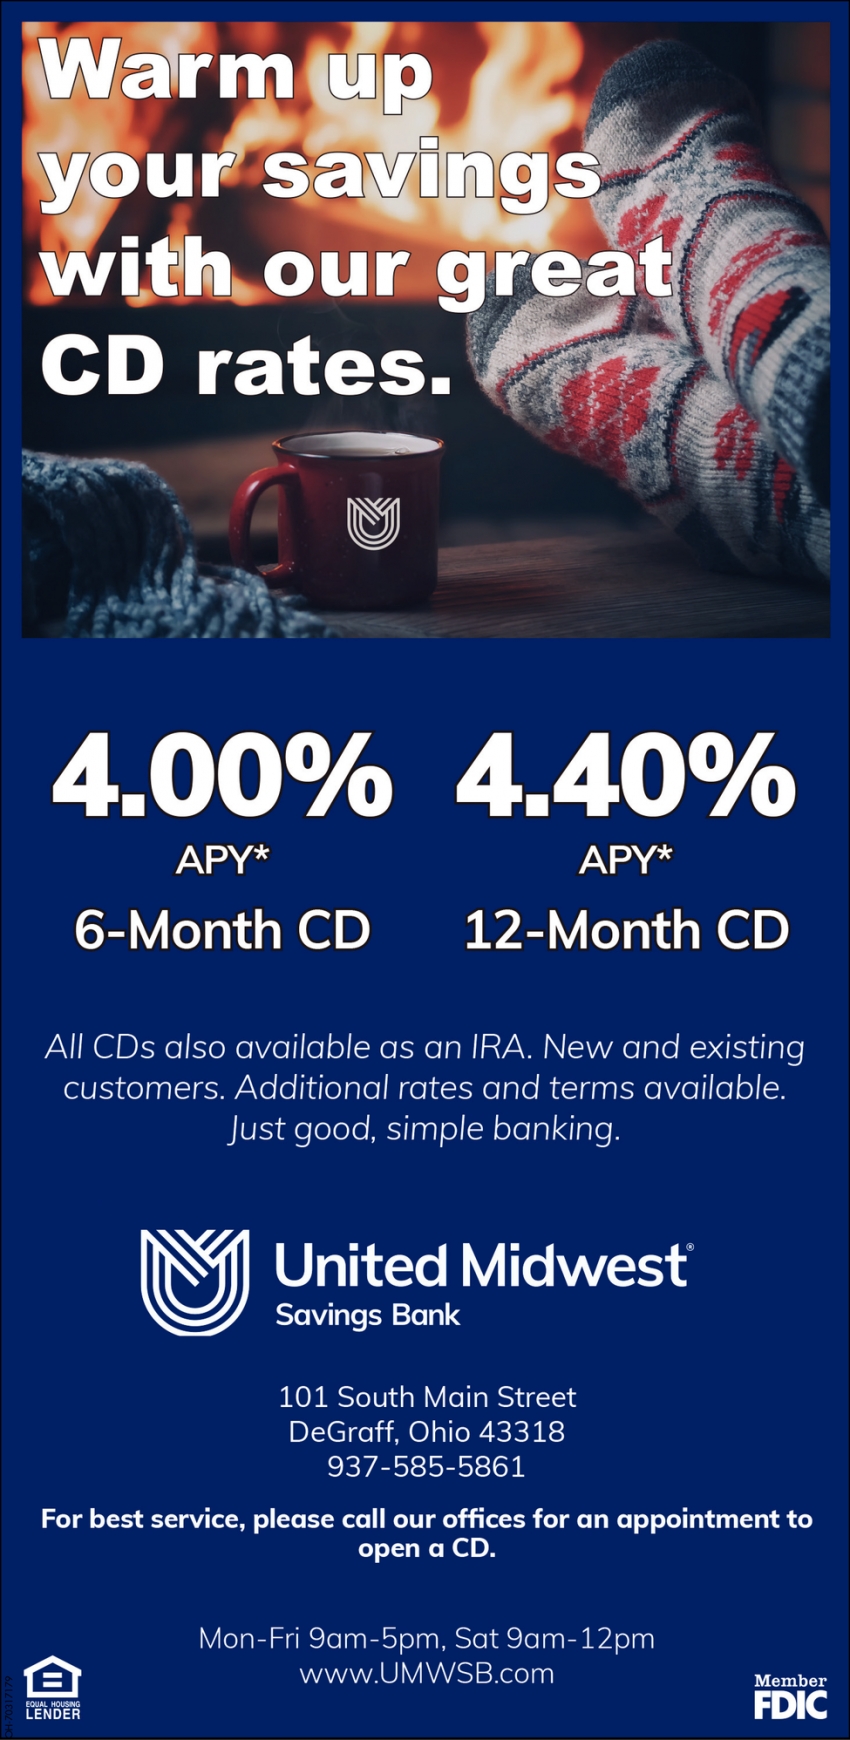 Warm Up Your Savings With Our Great CD Rates